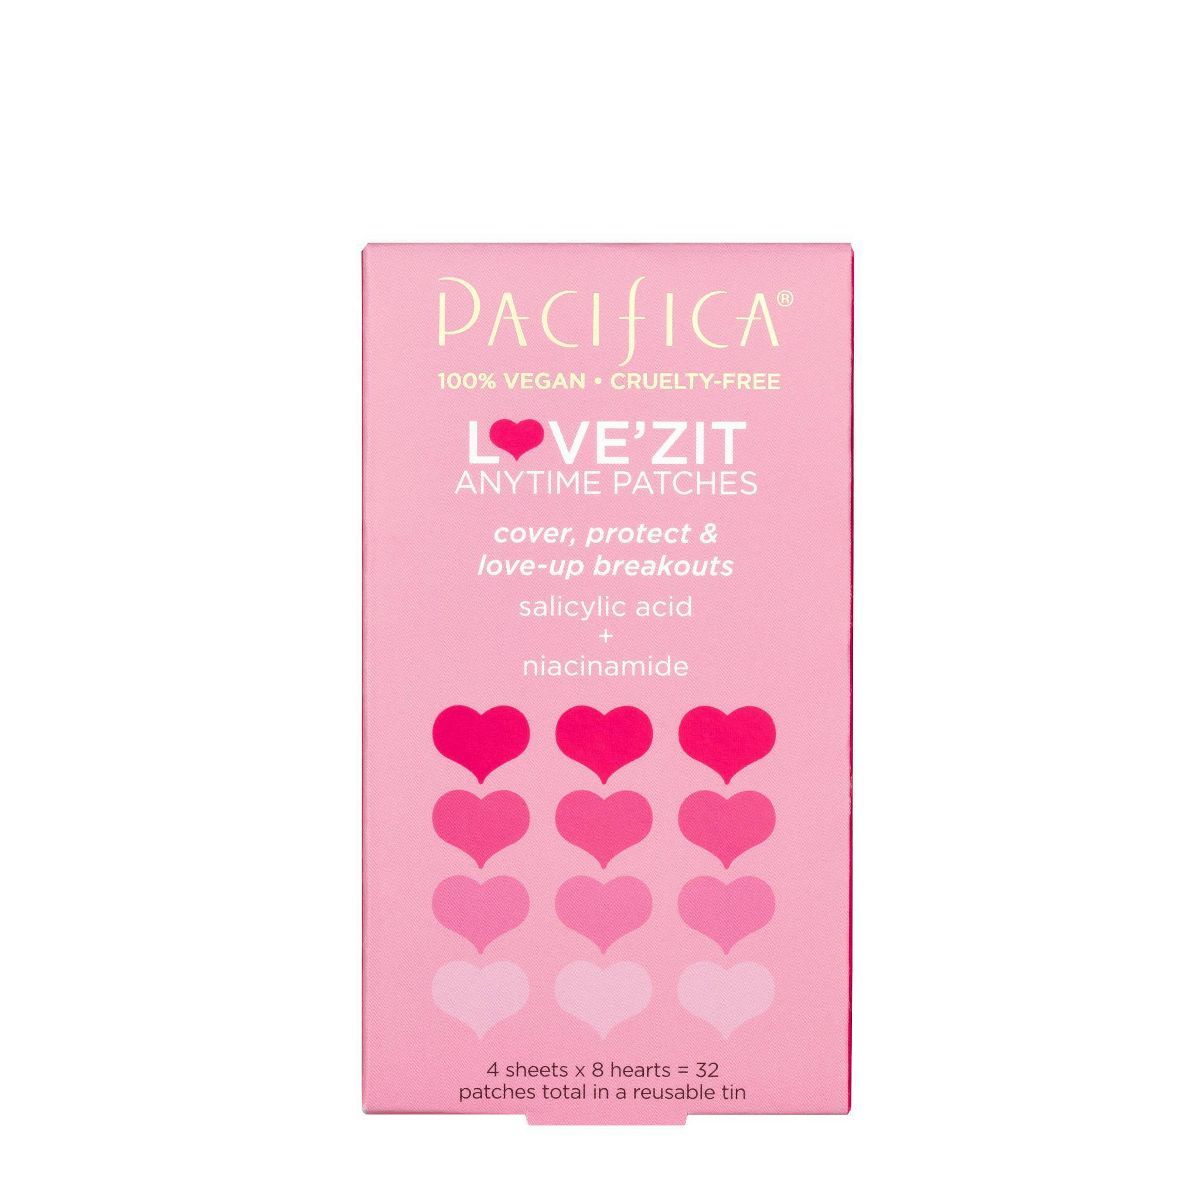 Pacifica Love’Zit Anytime Patches - 32ct | Target